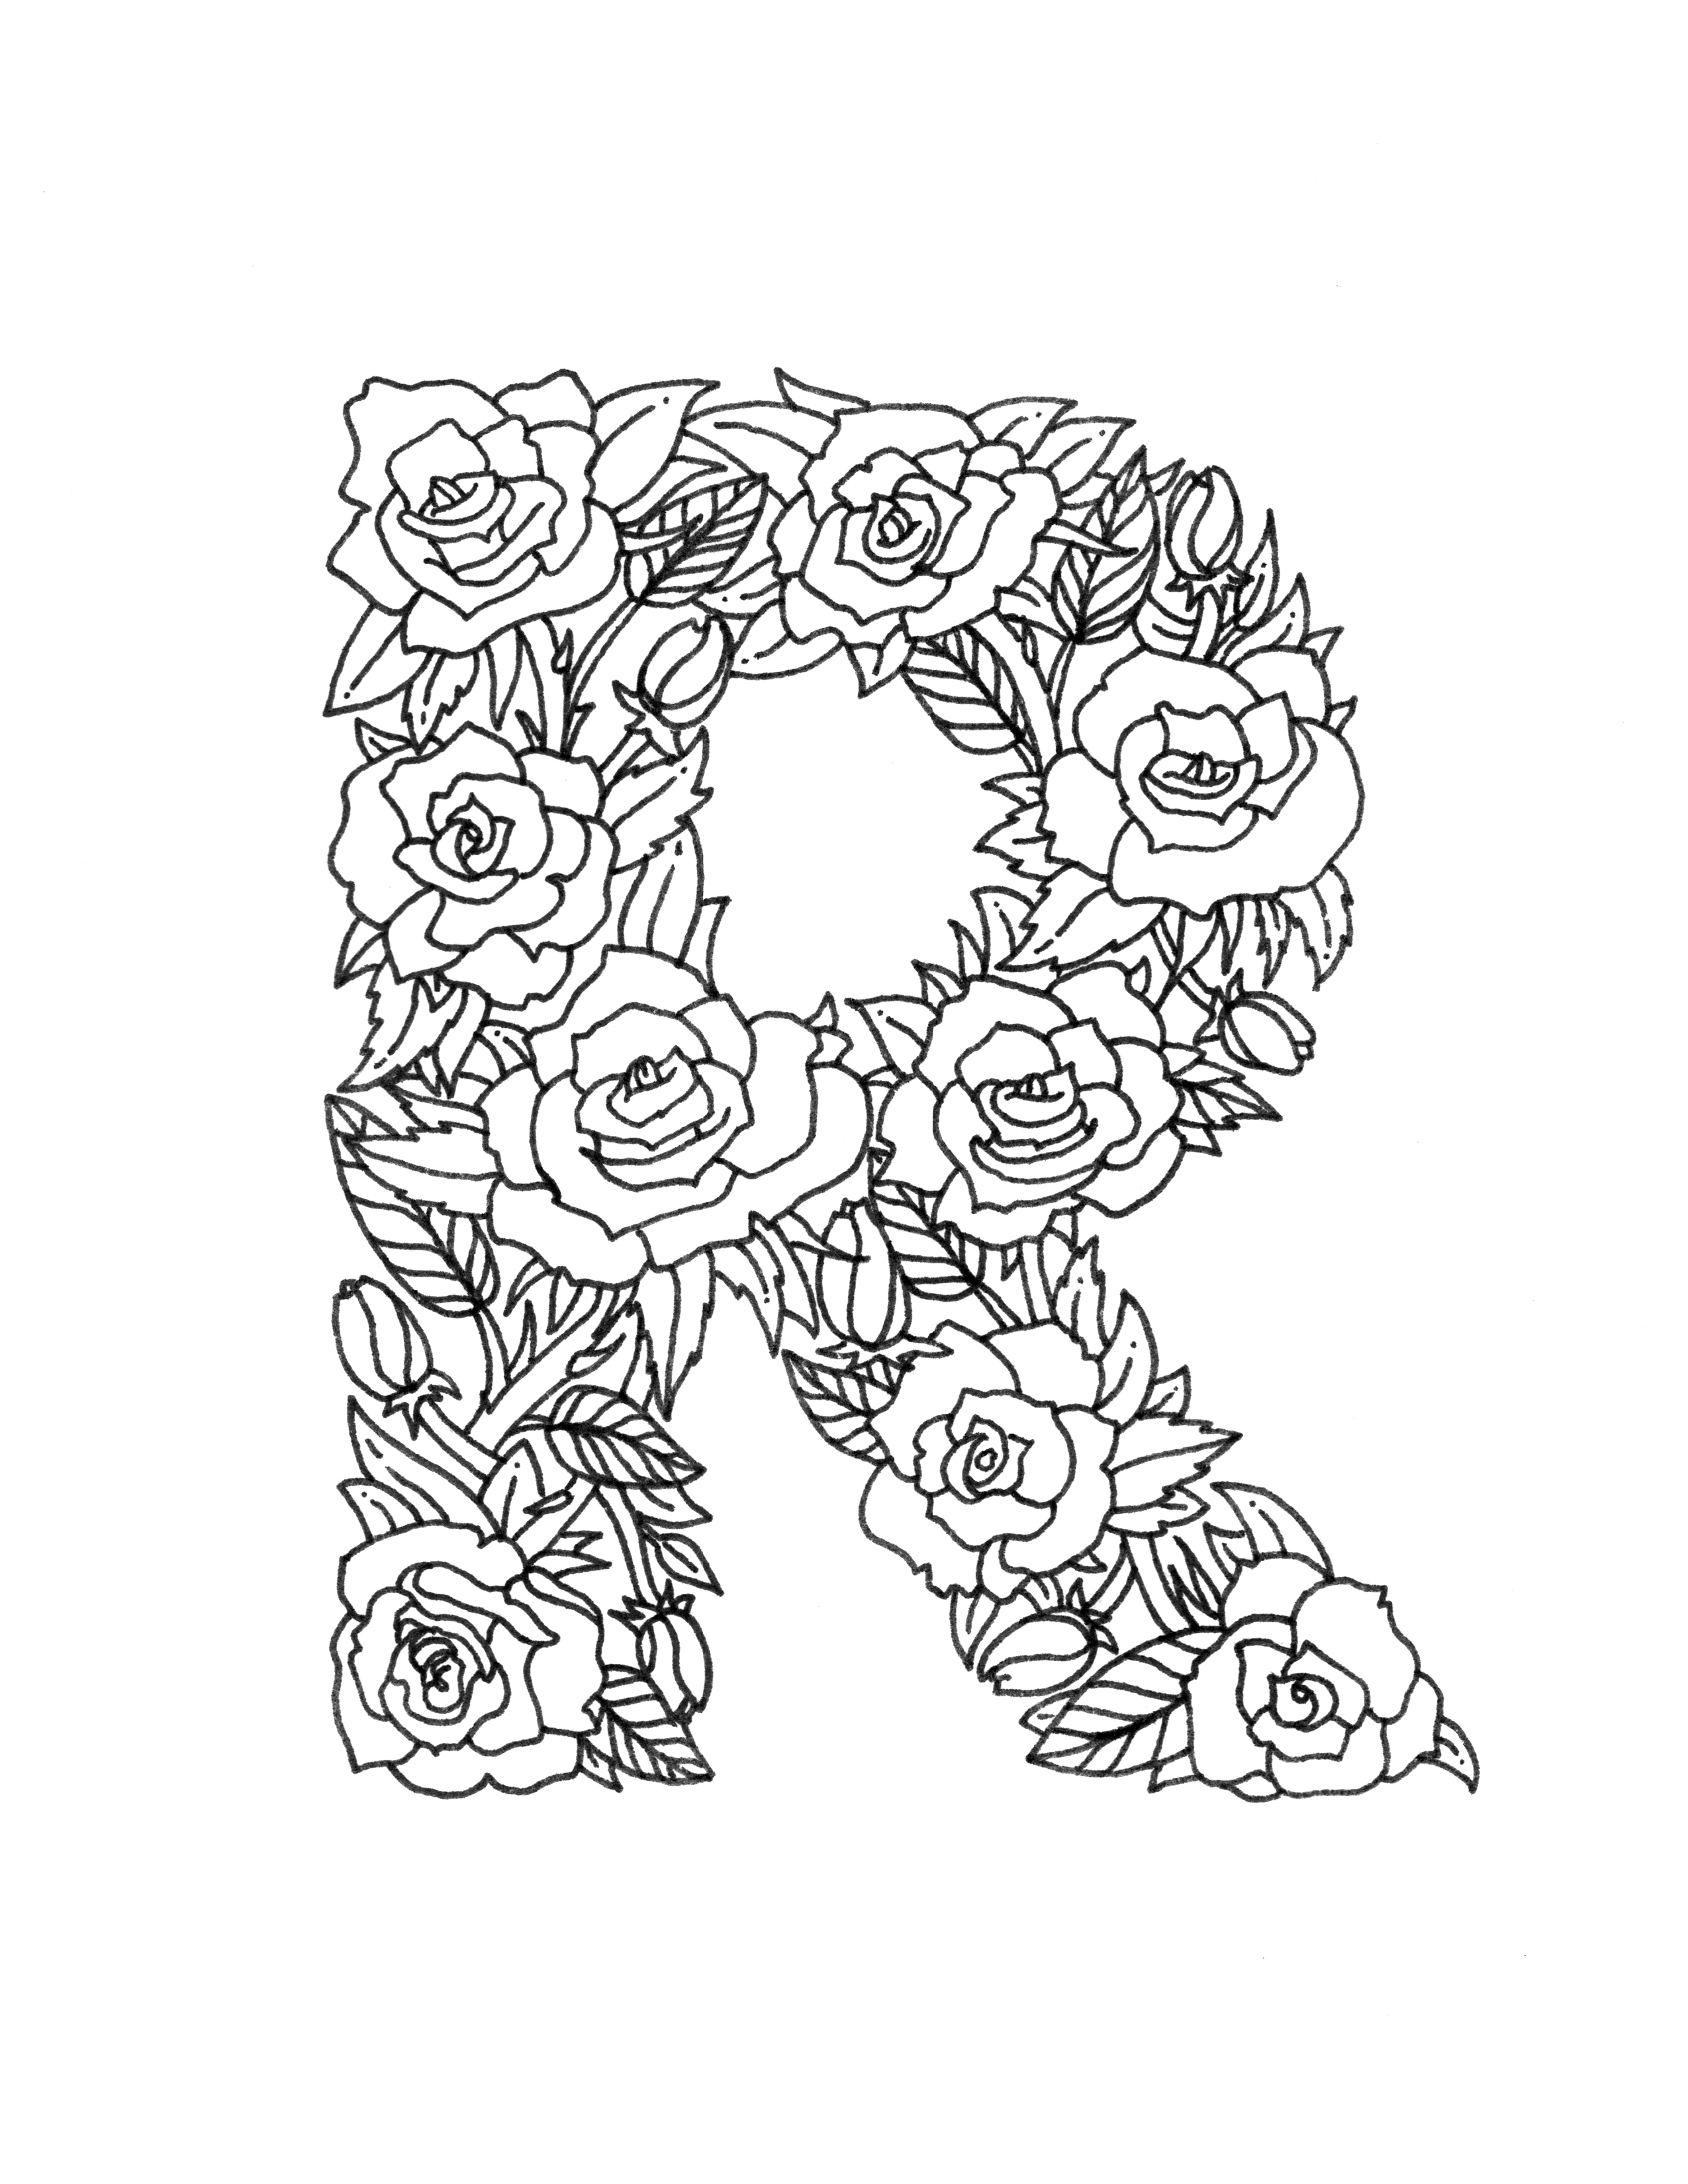 Download Free Coloring Pages of the Letter R Download